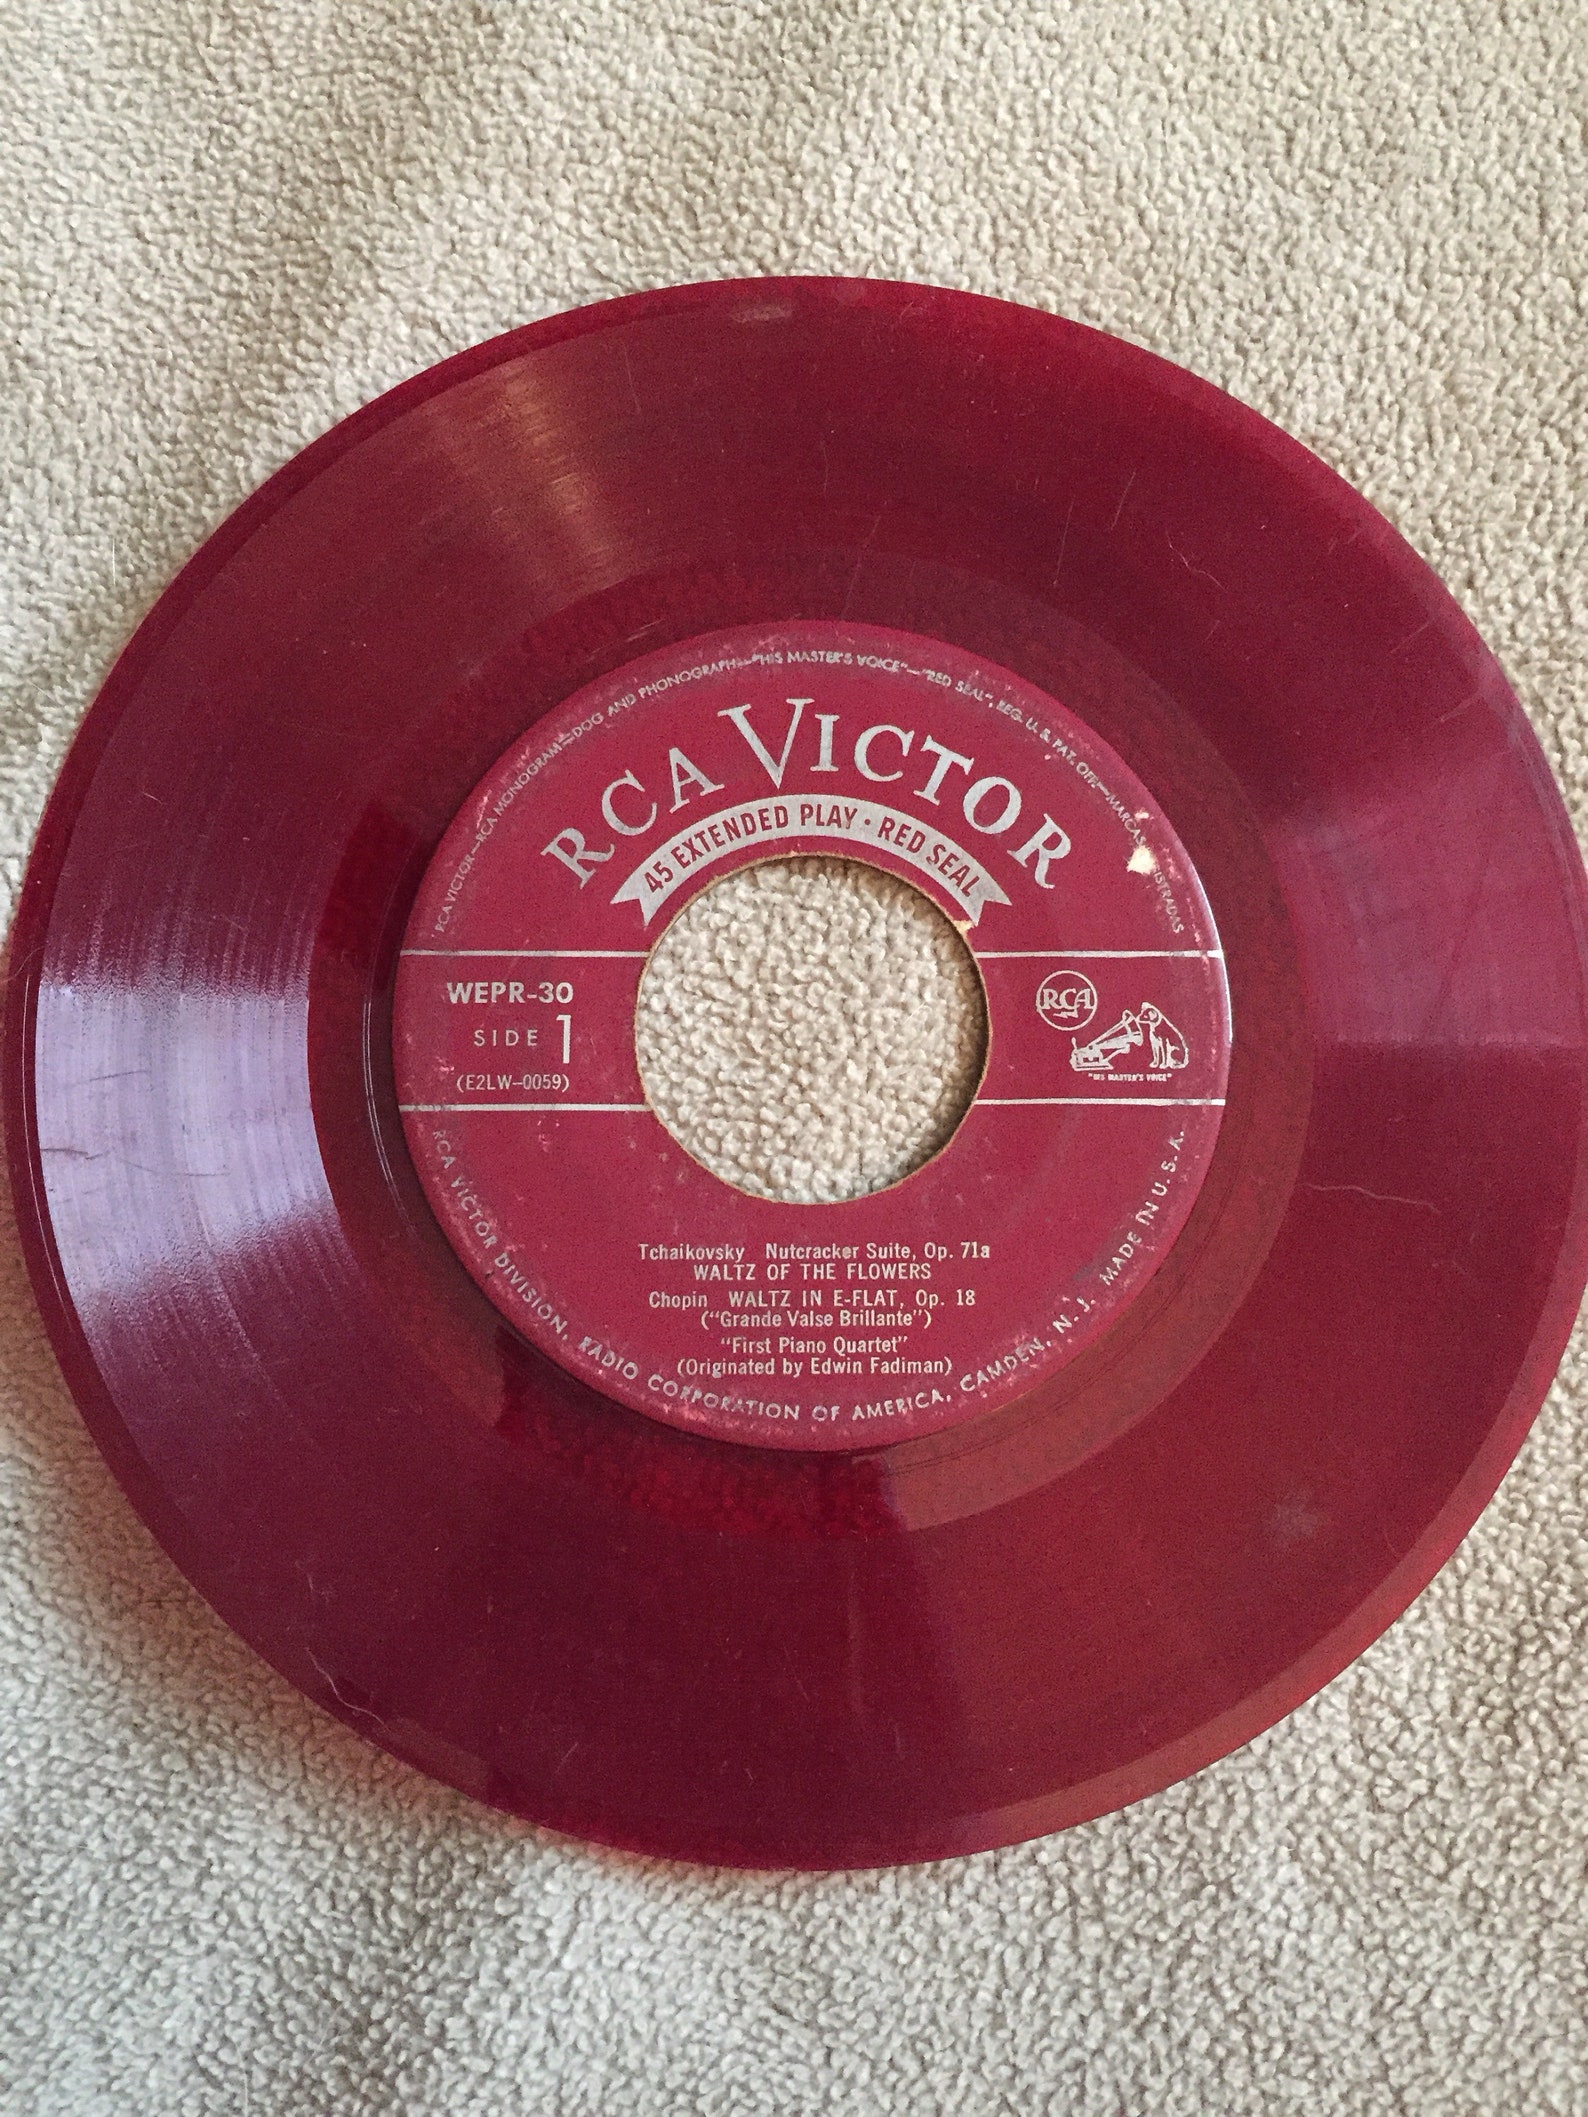 Rca Victor Red Seal 45 Record Waltz Of The Flowers Gypsy